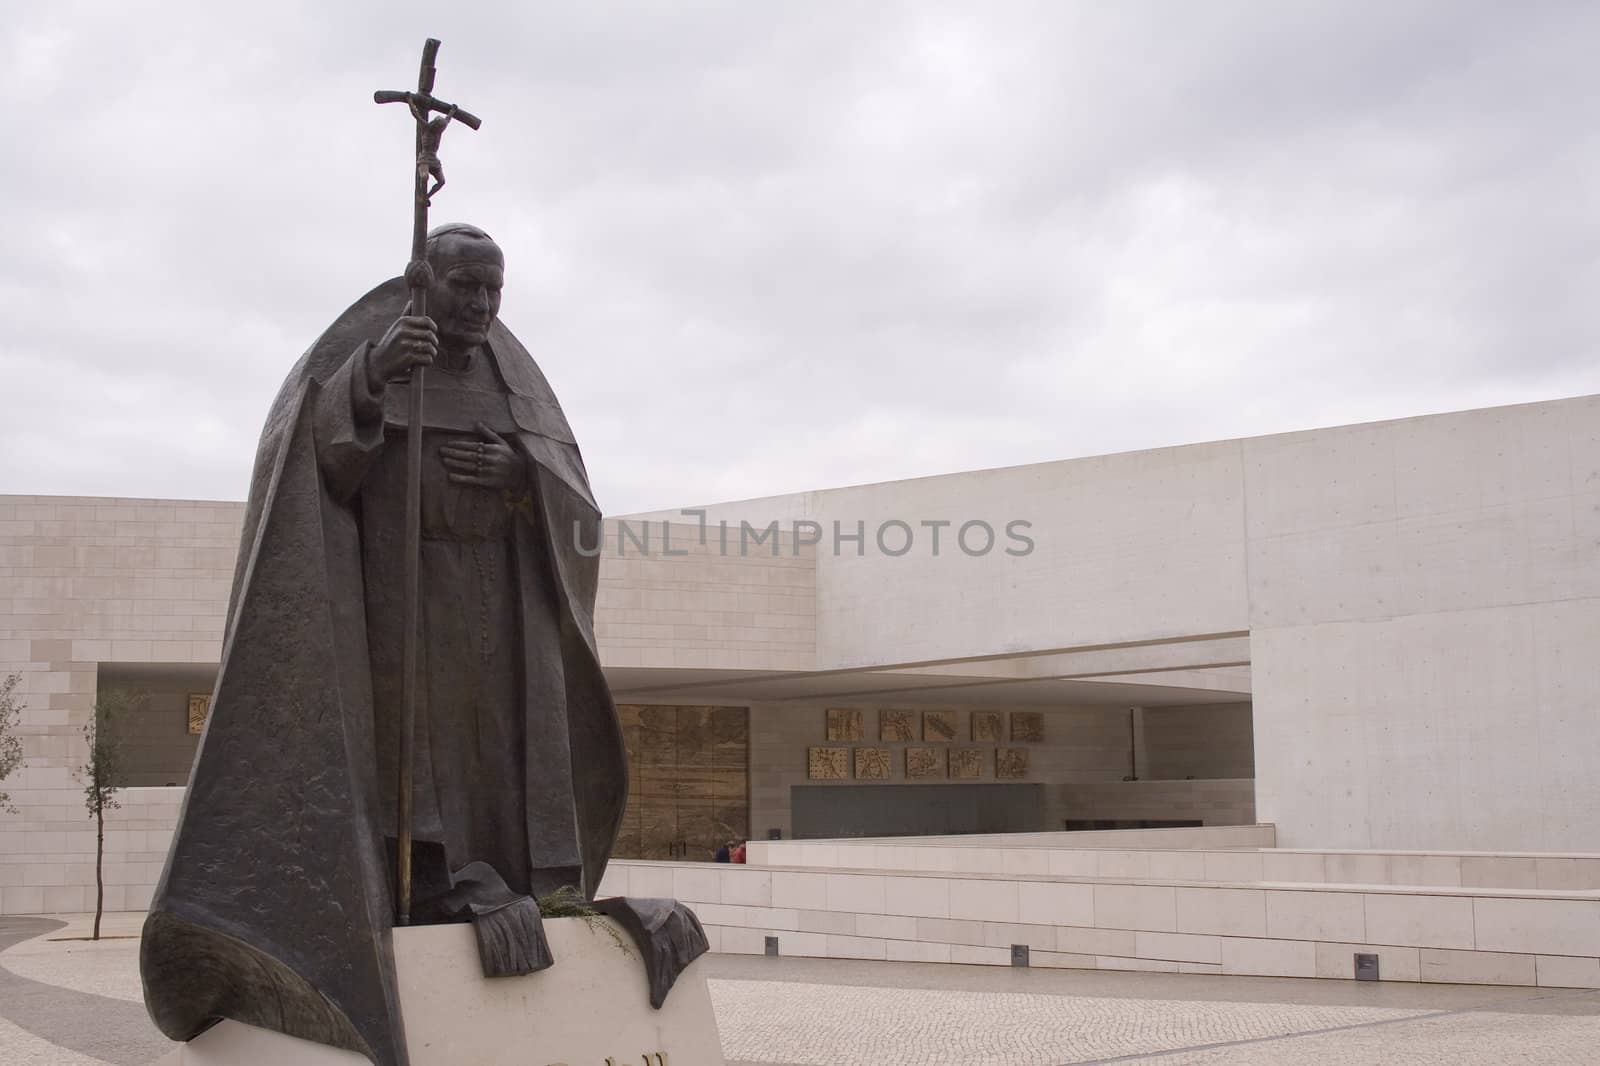 New cathedral in Fatima Portugal by PauloResende